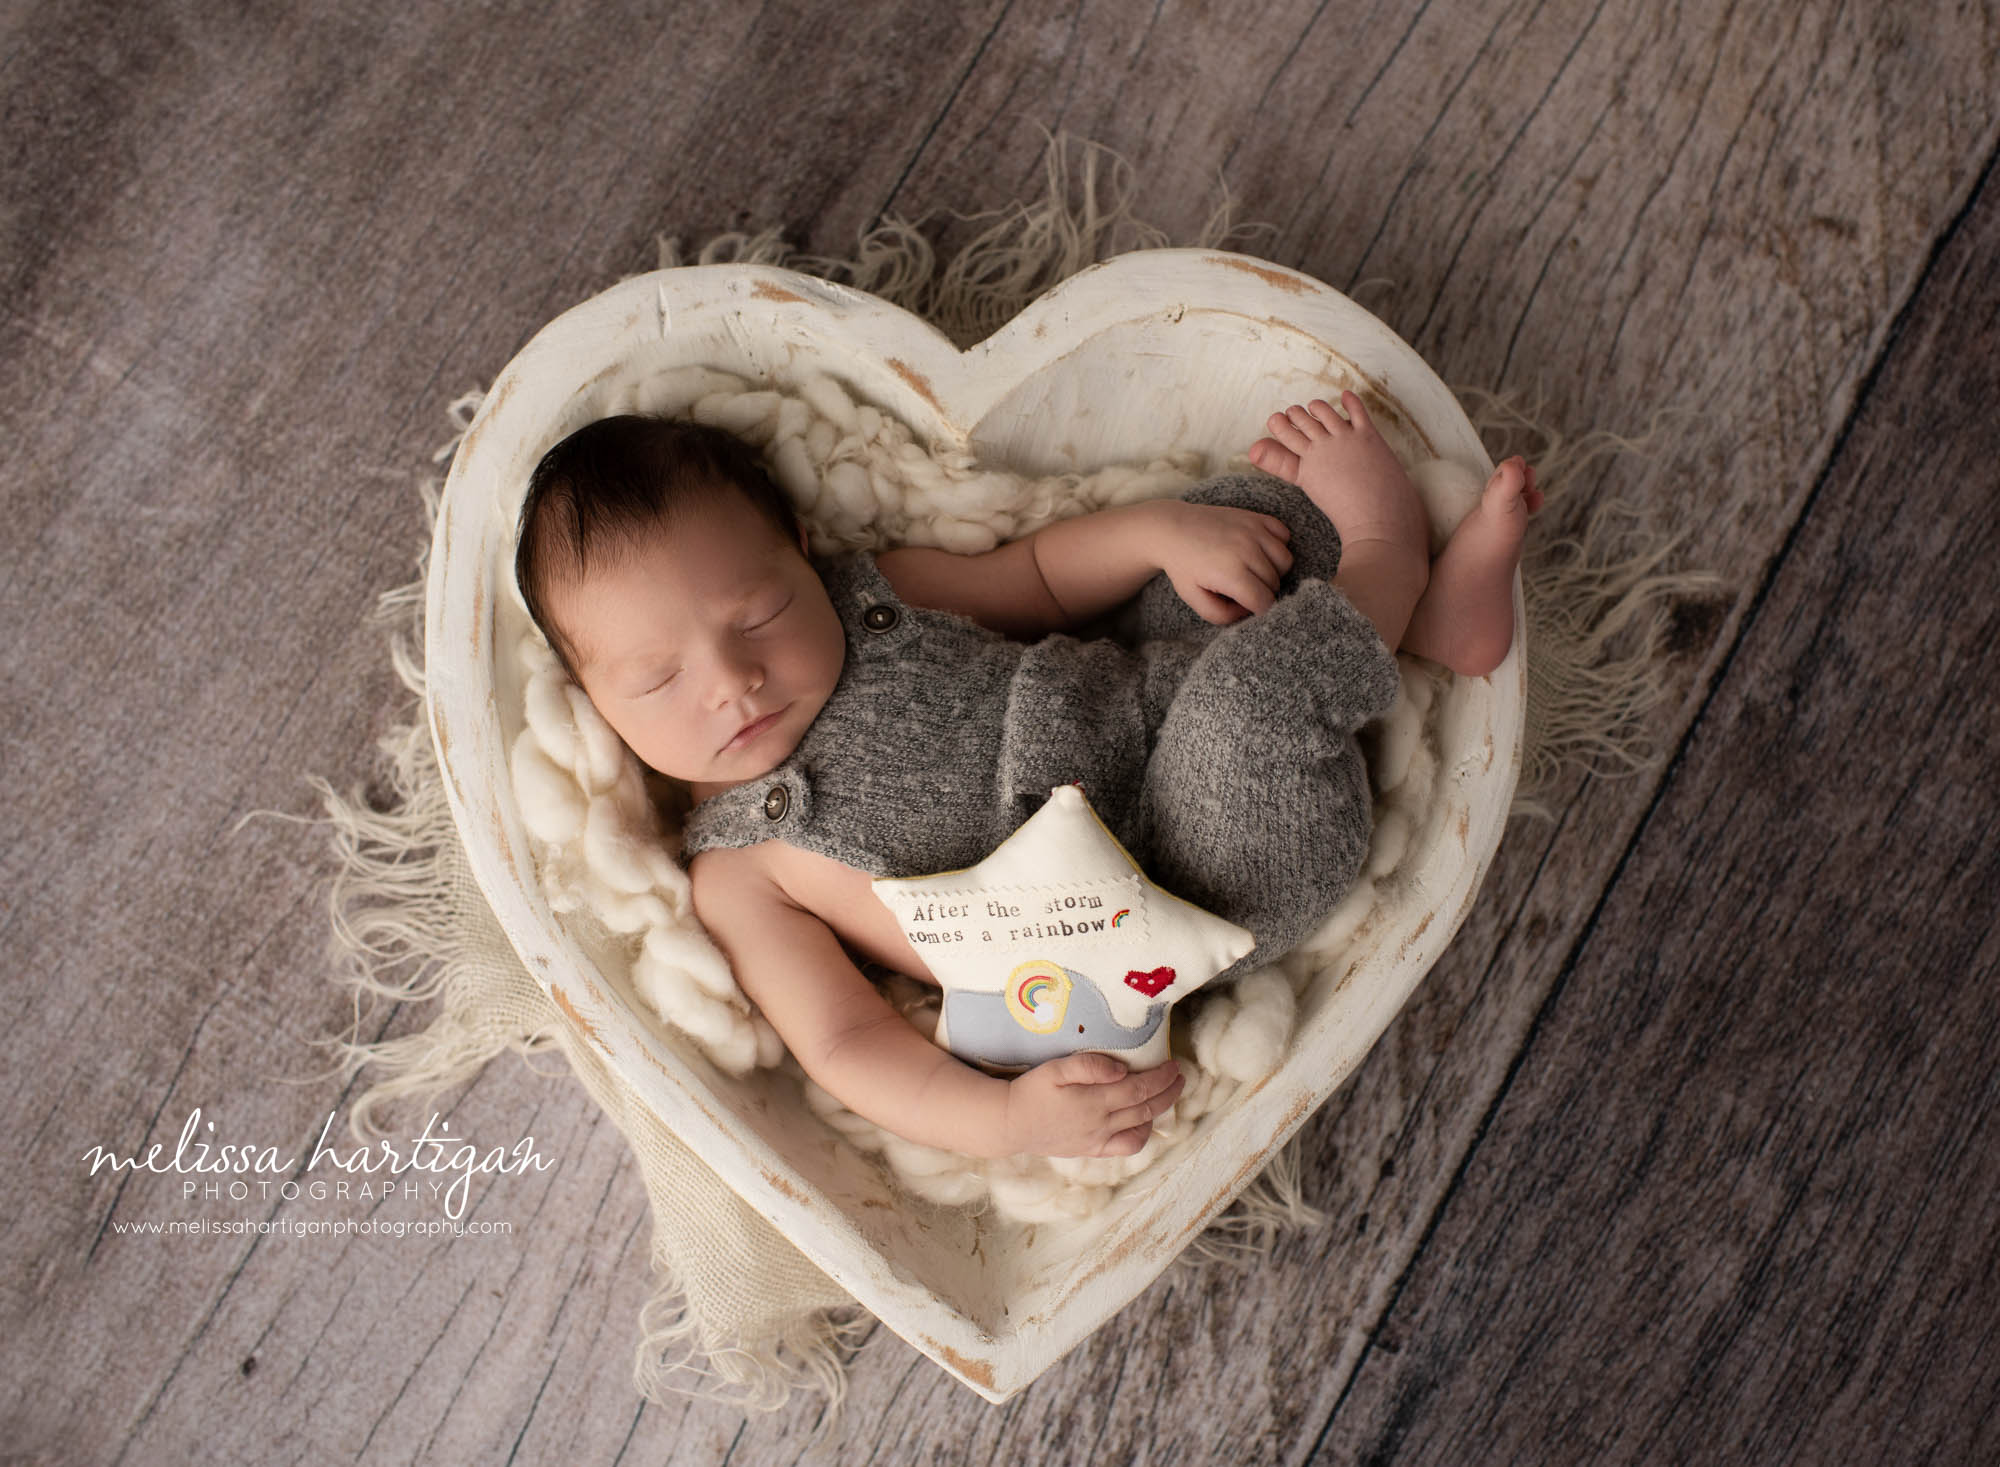 newborn baby boy posed in wooden cream heart shaped prop wearing gray outfit holding star newborn photography newington CT